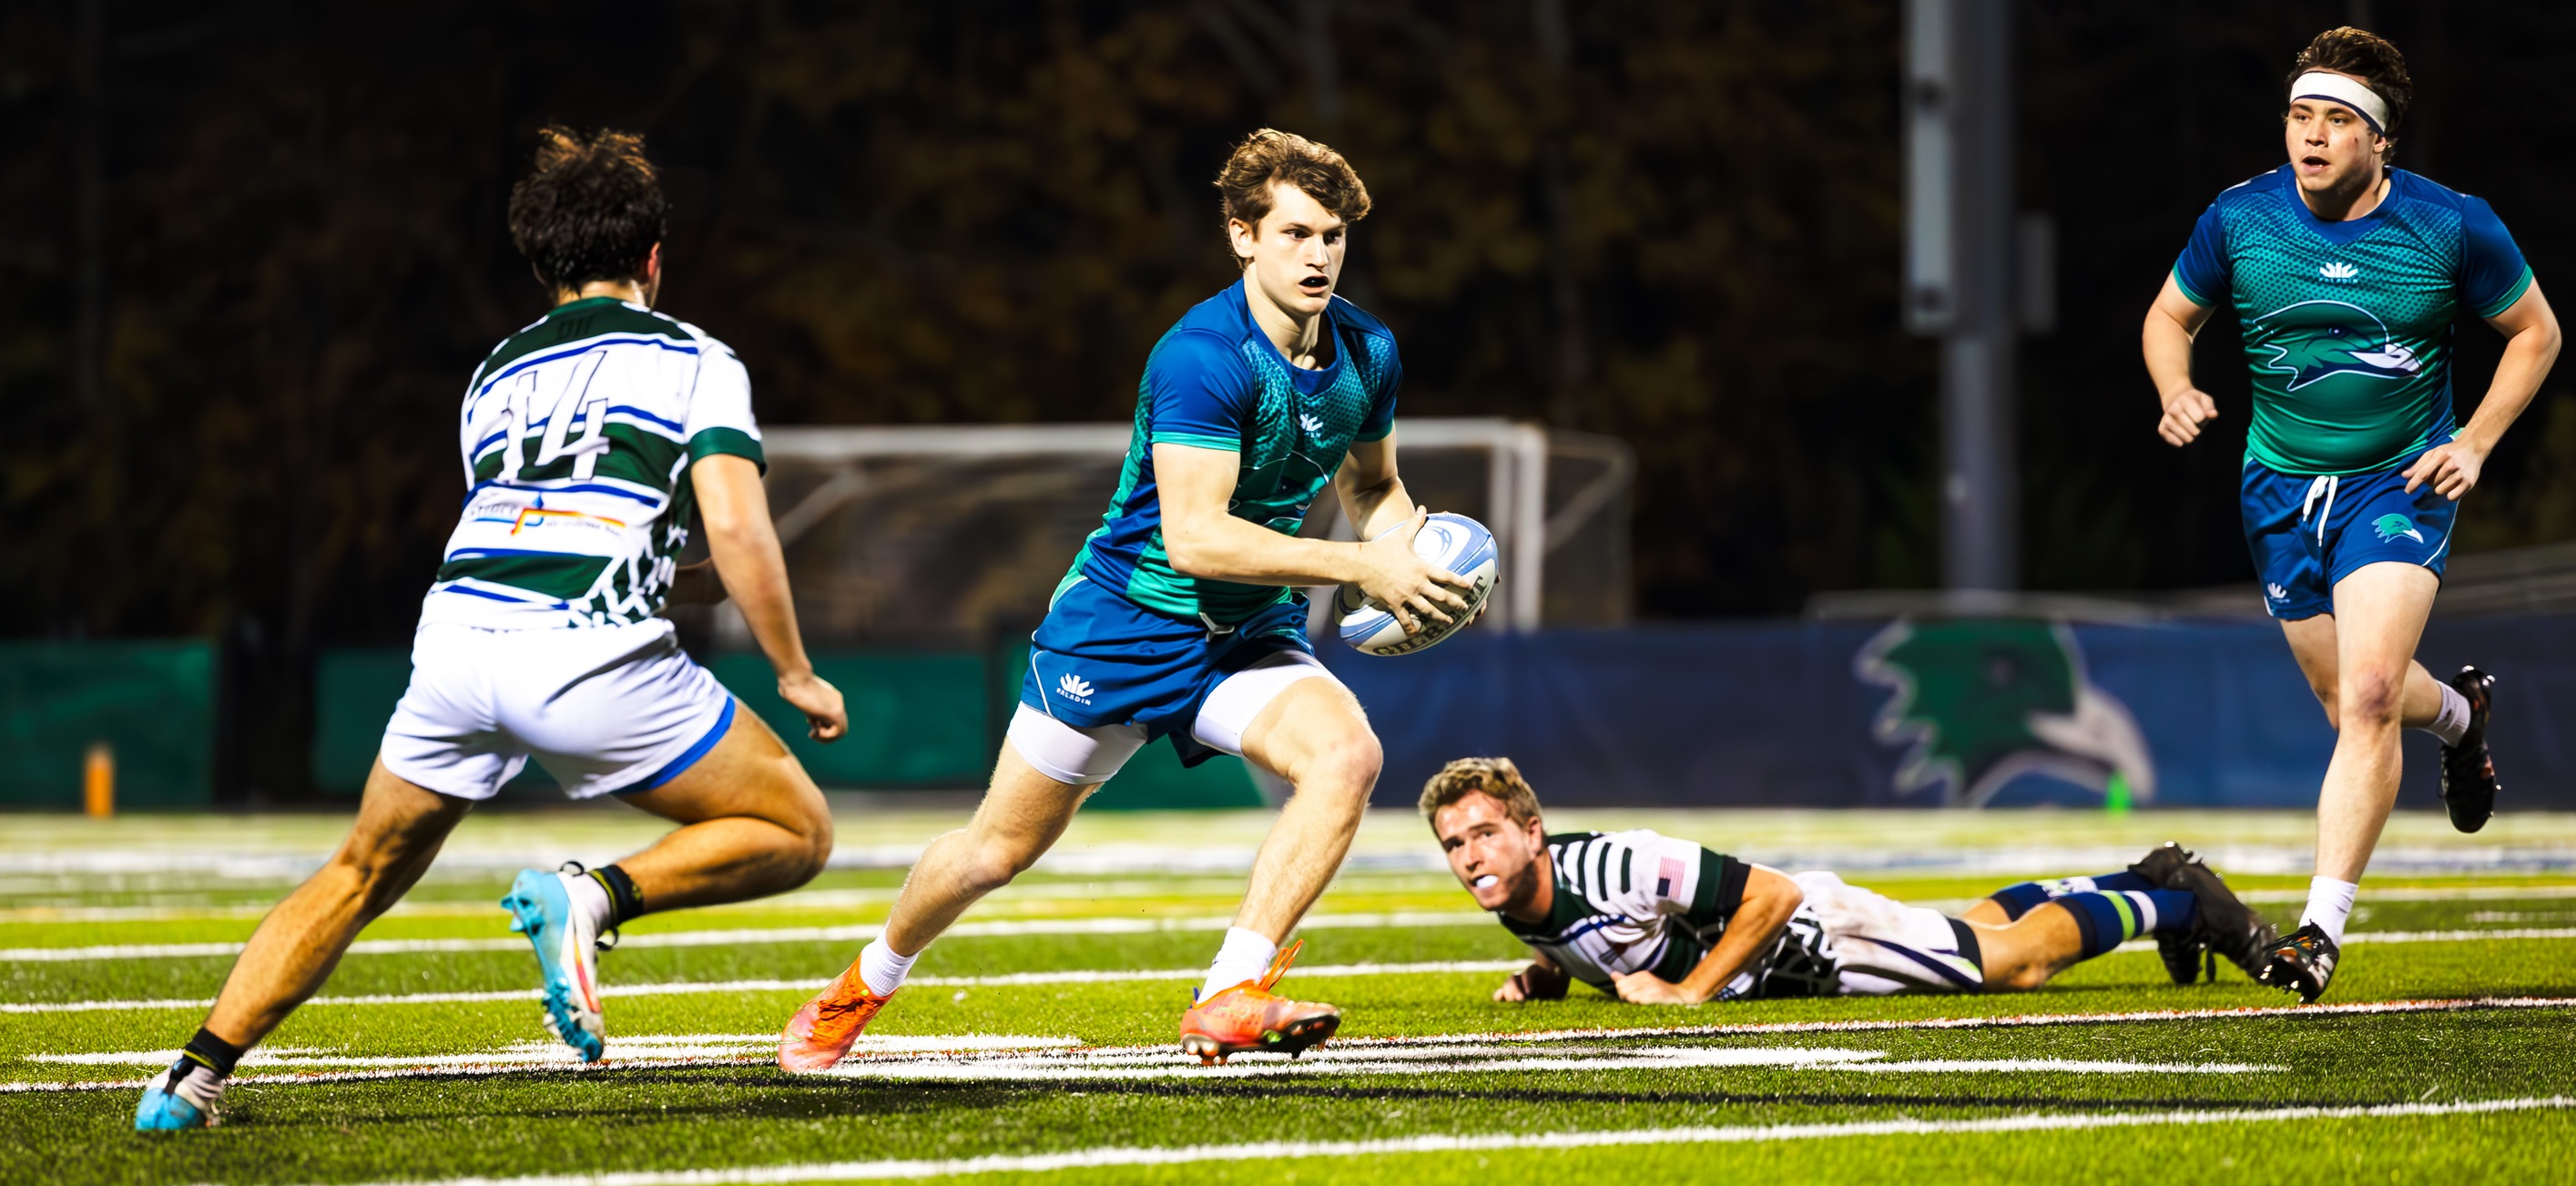 No. 4 Men's Rugby Defeats Holy Cross In NCR Regionals, 41-7